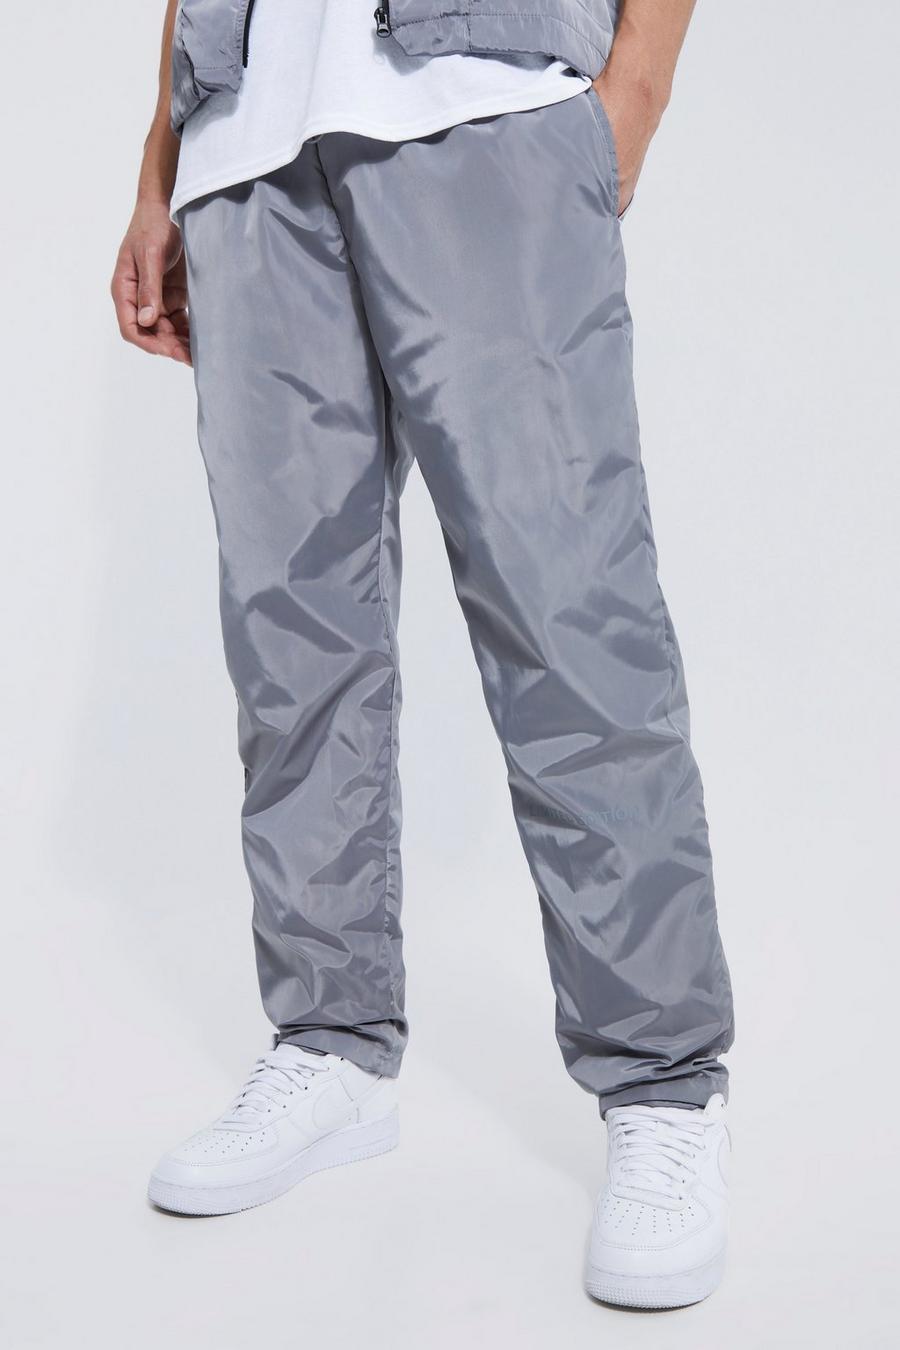 Grey gris Tall Elastic Waist Limited Edition Trouser